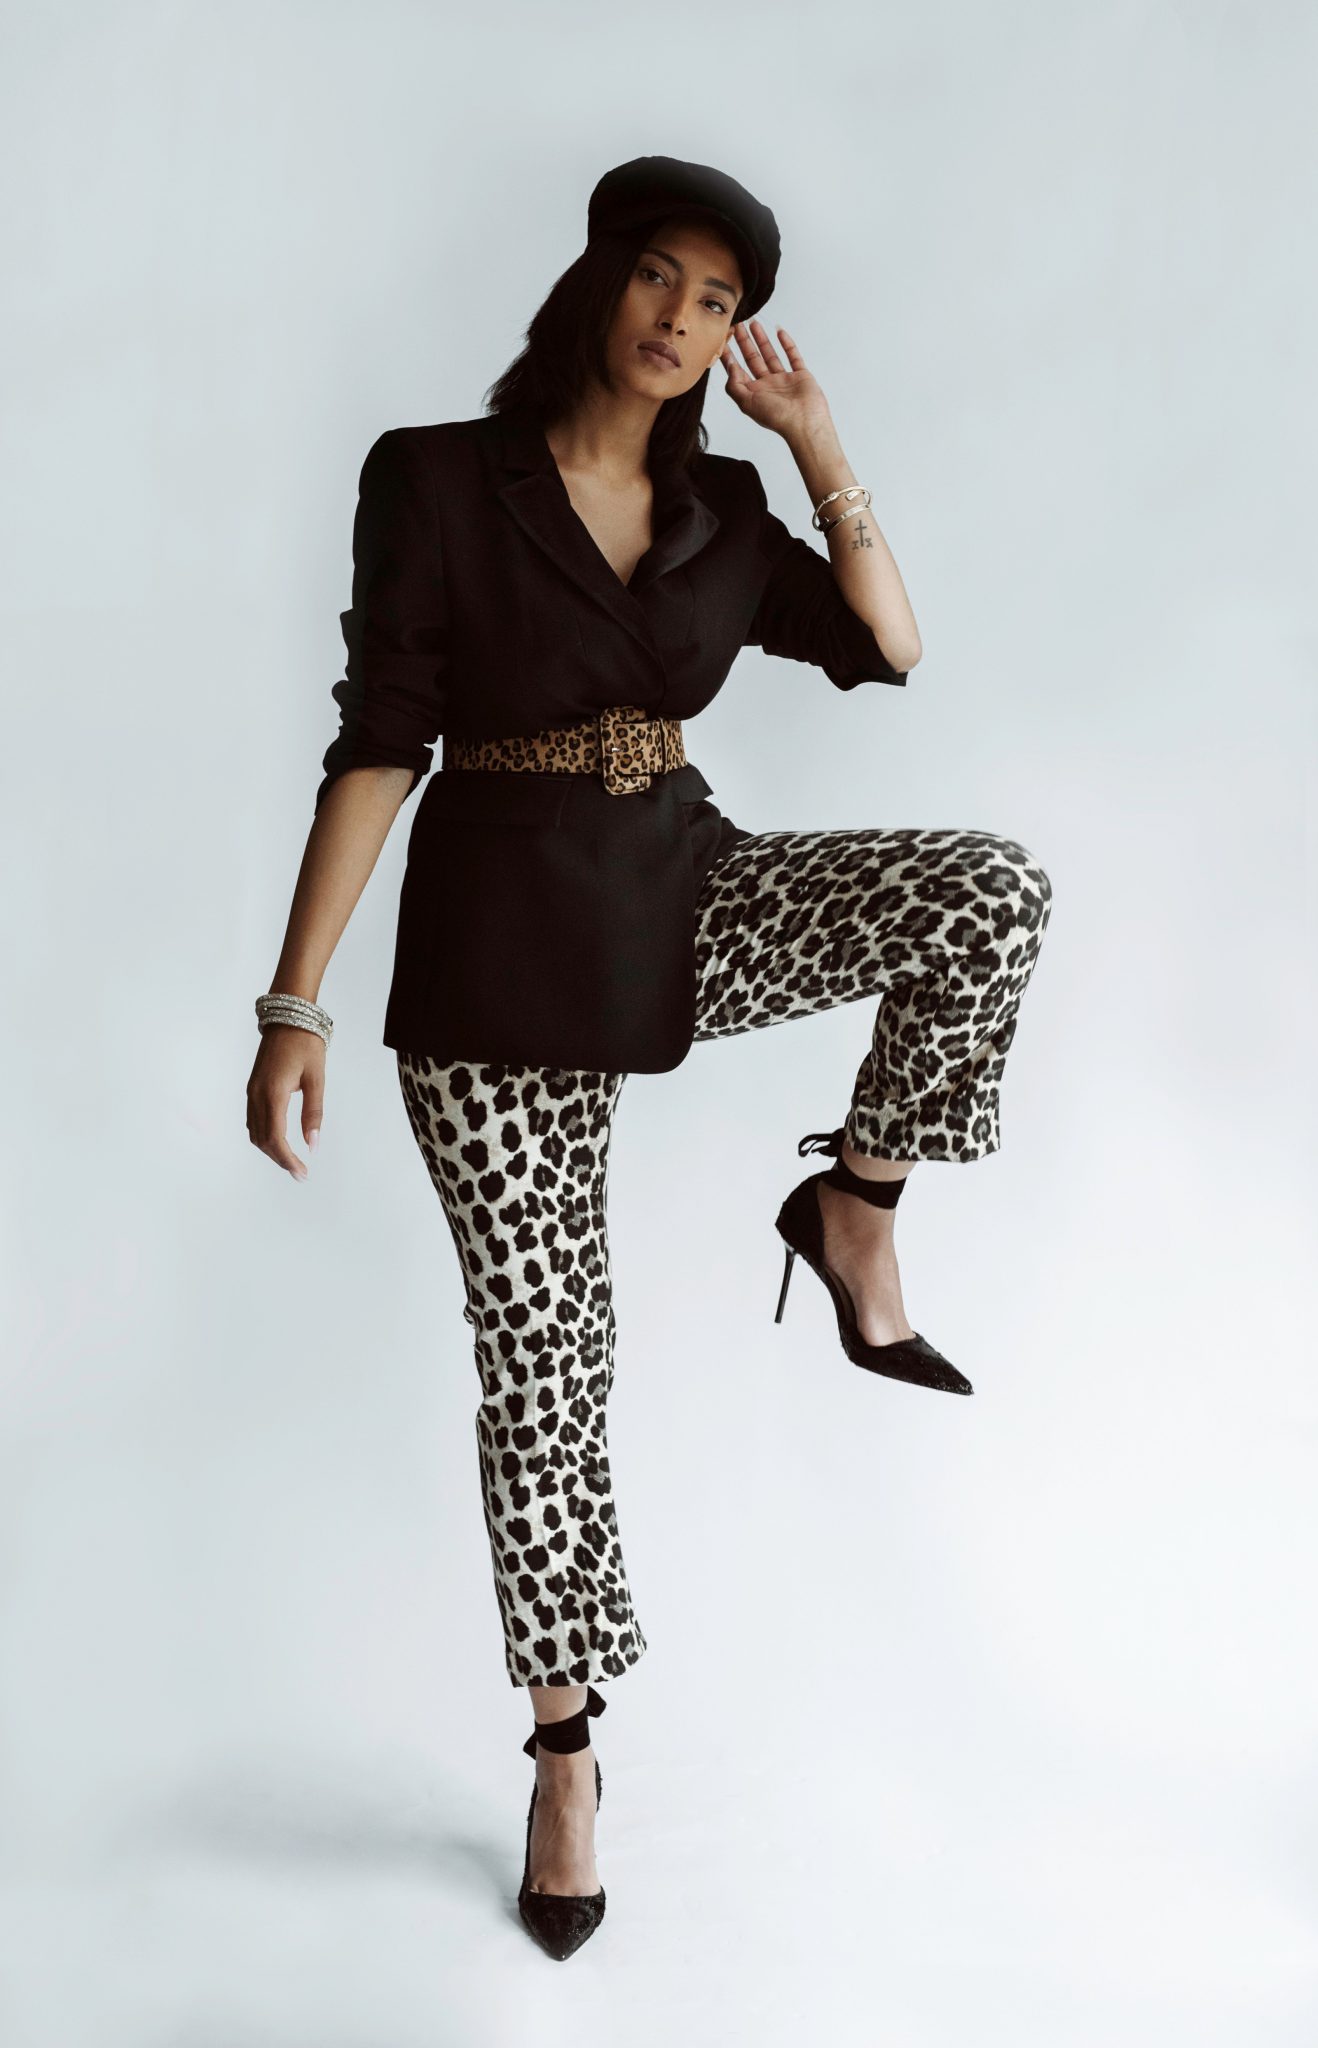 How to Wear Animal Prints | Dressing the Nation